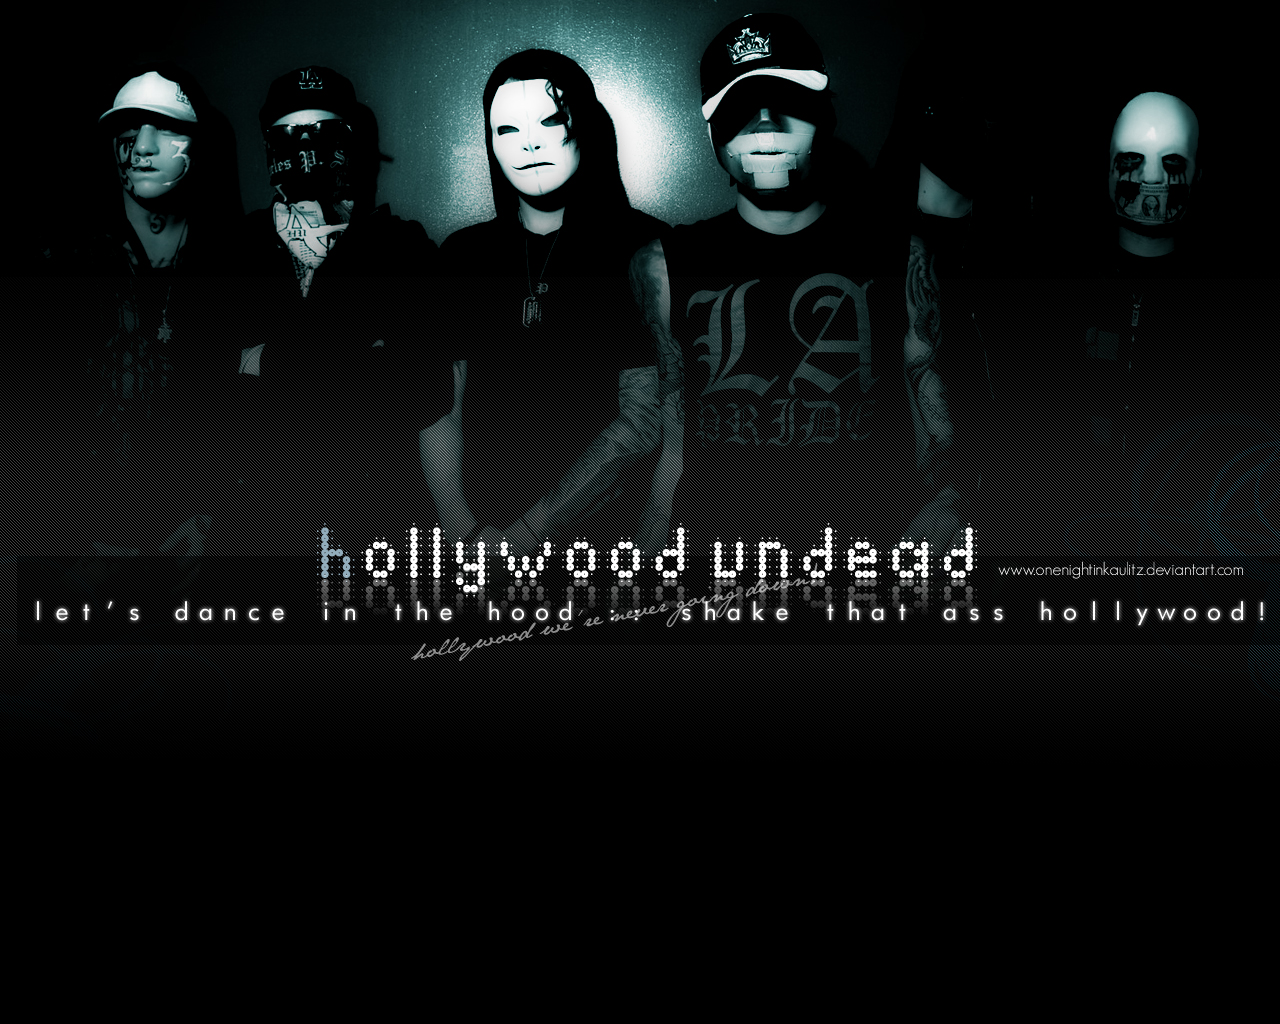  Hollywood Undead Black Veil Brides And HD Walls Find Wallpapers